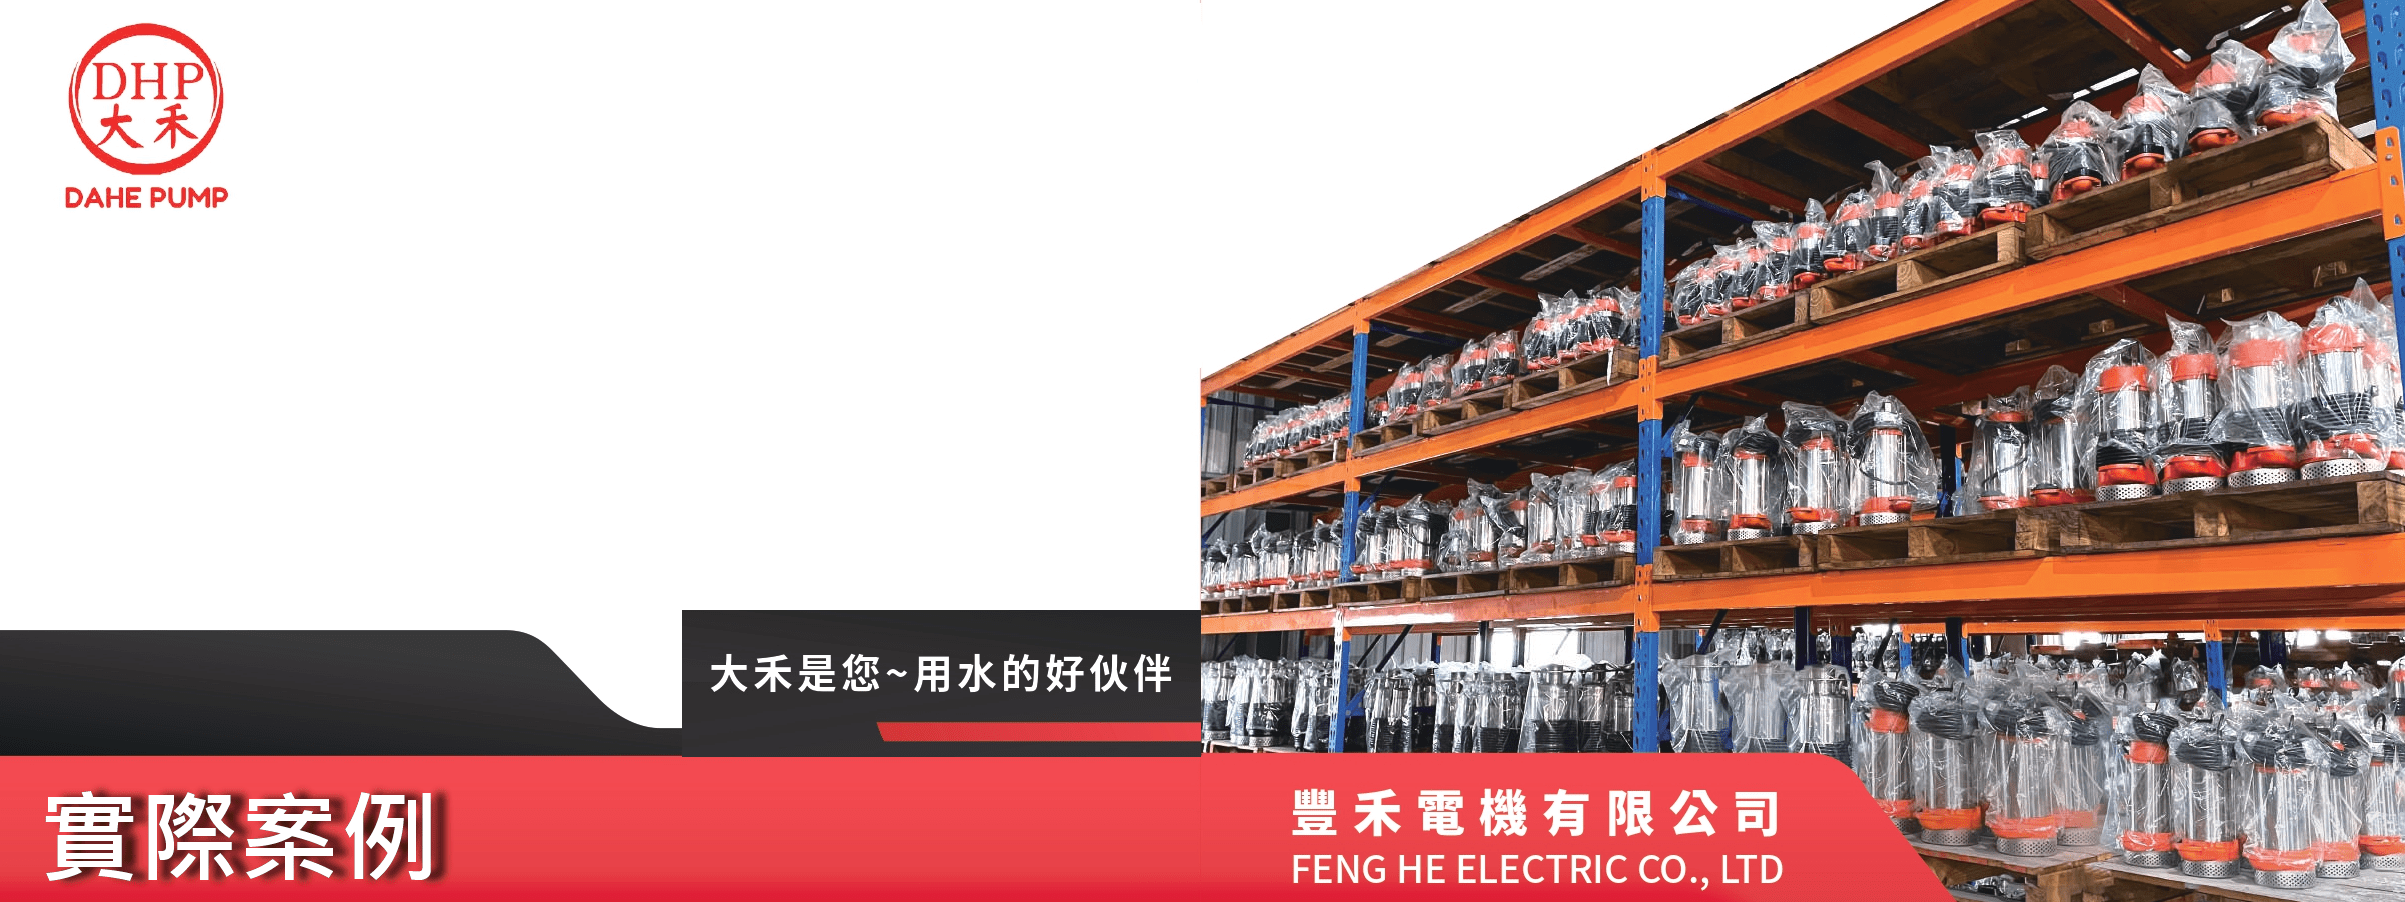 FENG HE ELECTRIC CO.,LTD.的Case Banner pic